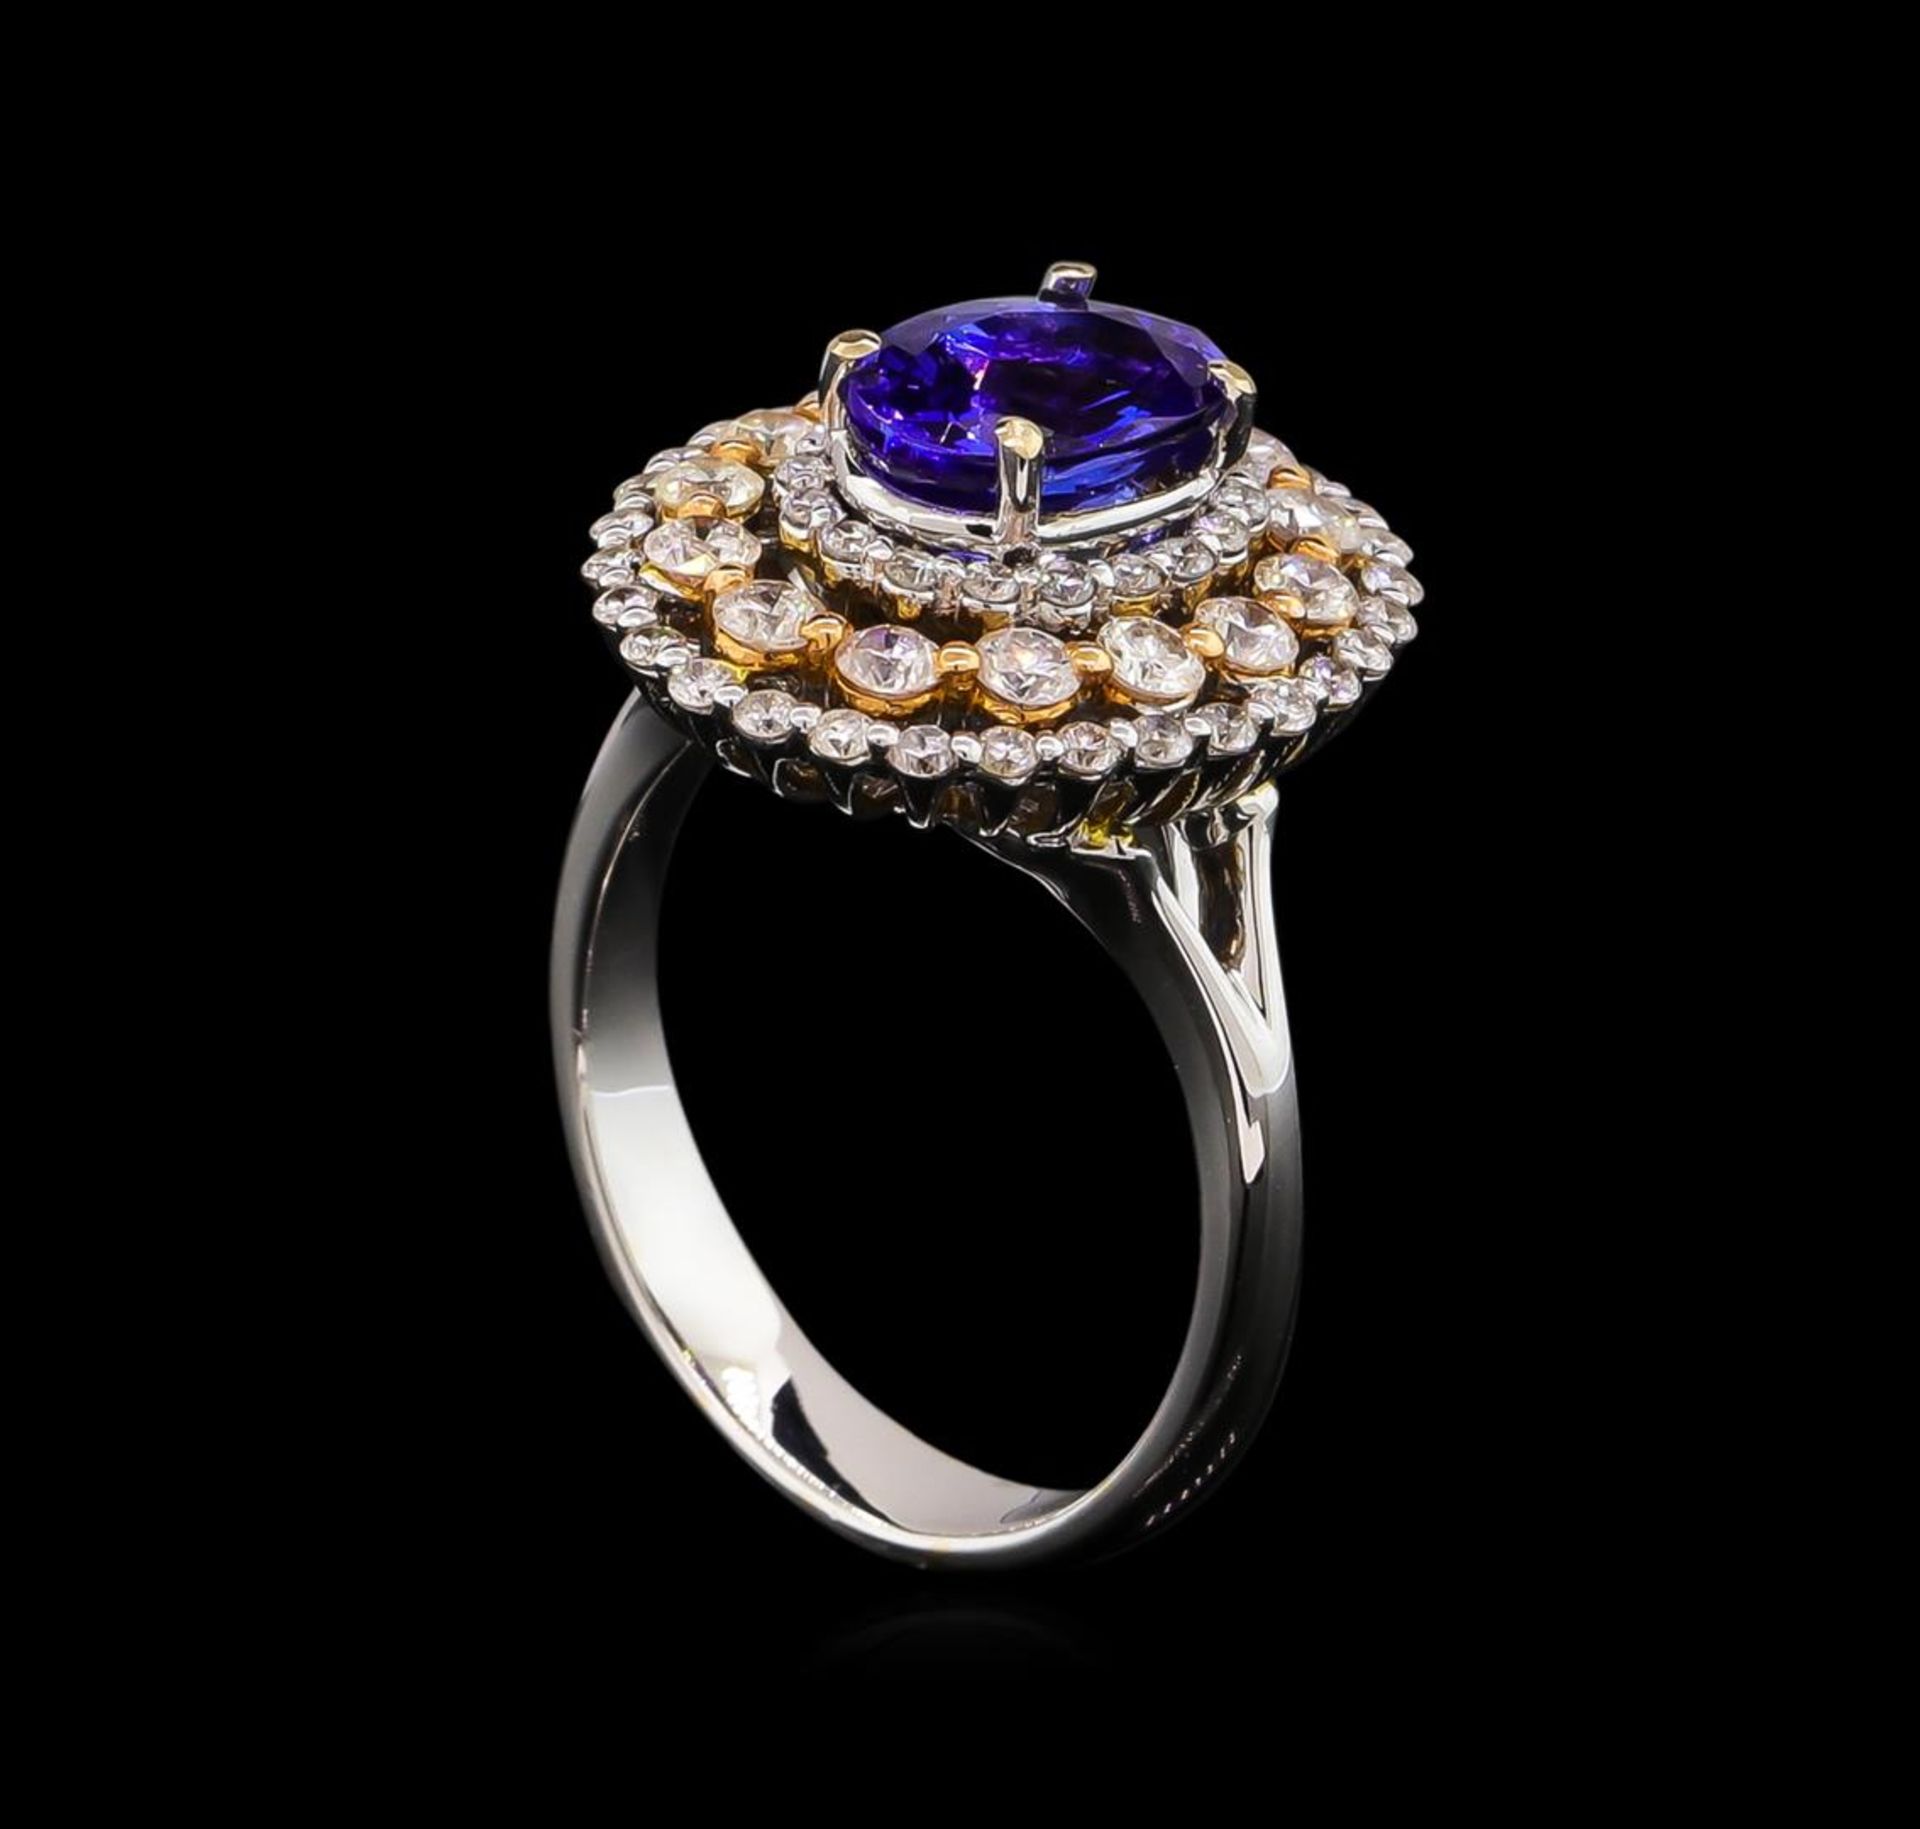 14KT Two-Tone Gold 1.73ct Tanzanite and Diamond Ring - Image 4 of 5